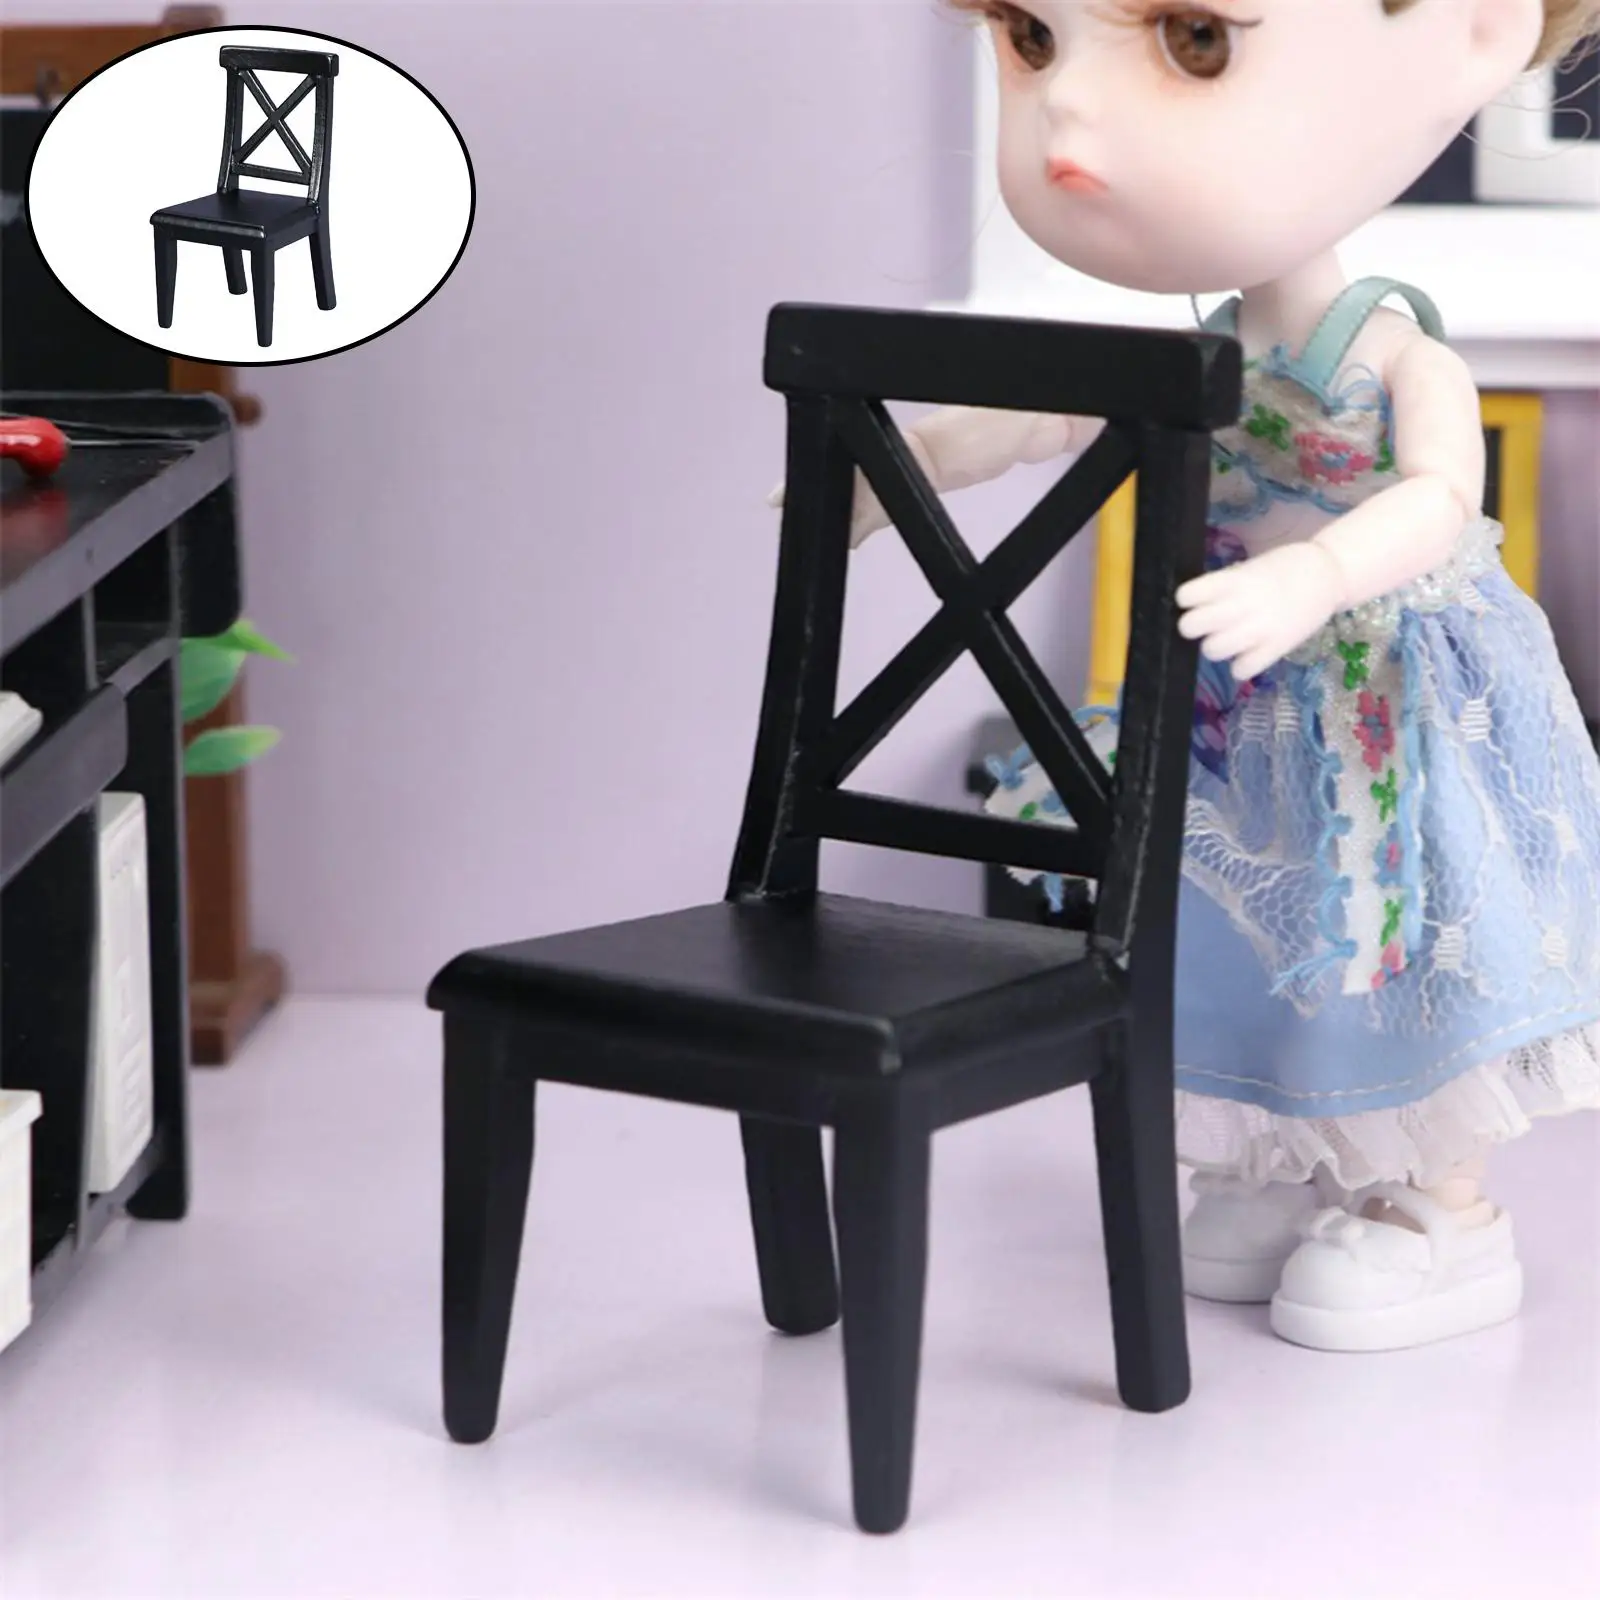 Black Dollhouse Miniature Chair Birthday Gifts Pretend Toy Toys for Kitchen